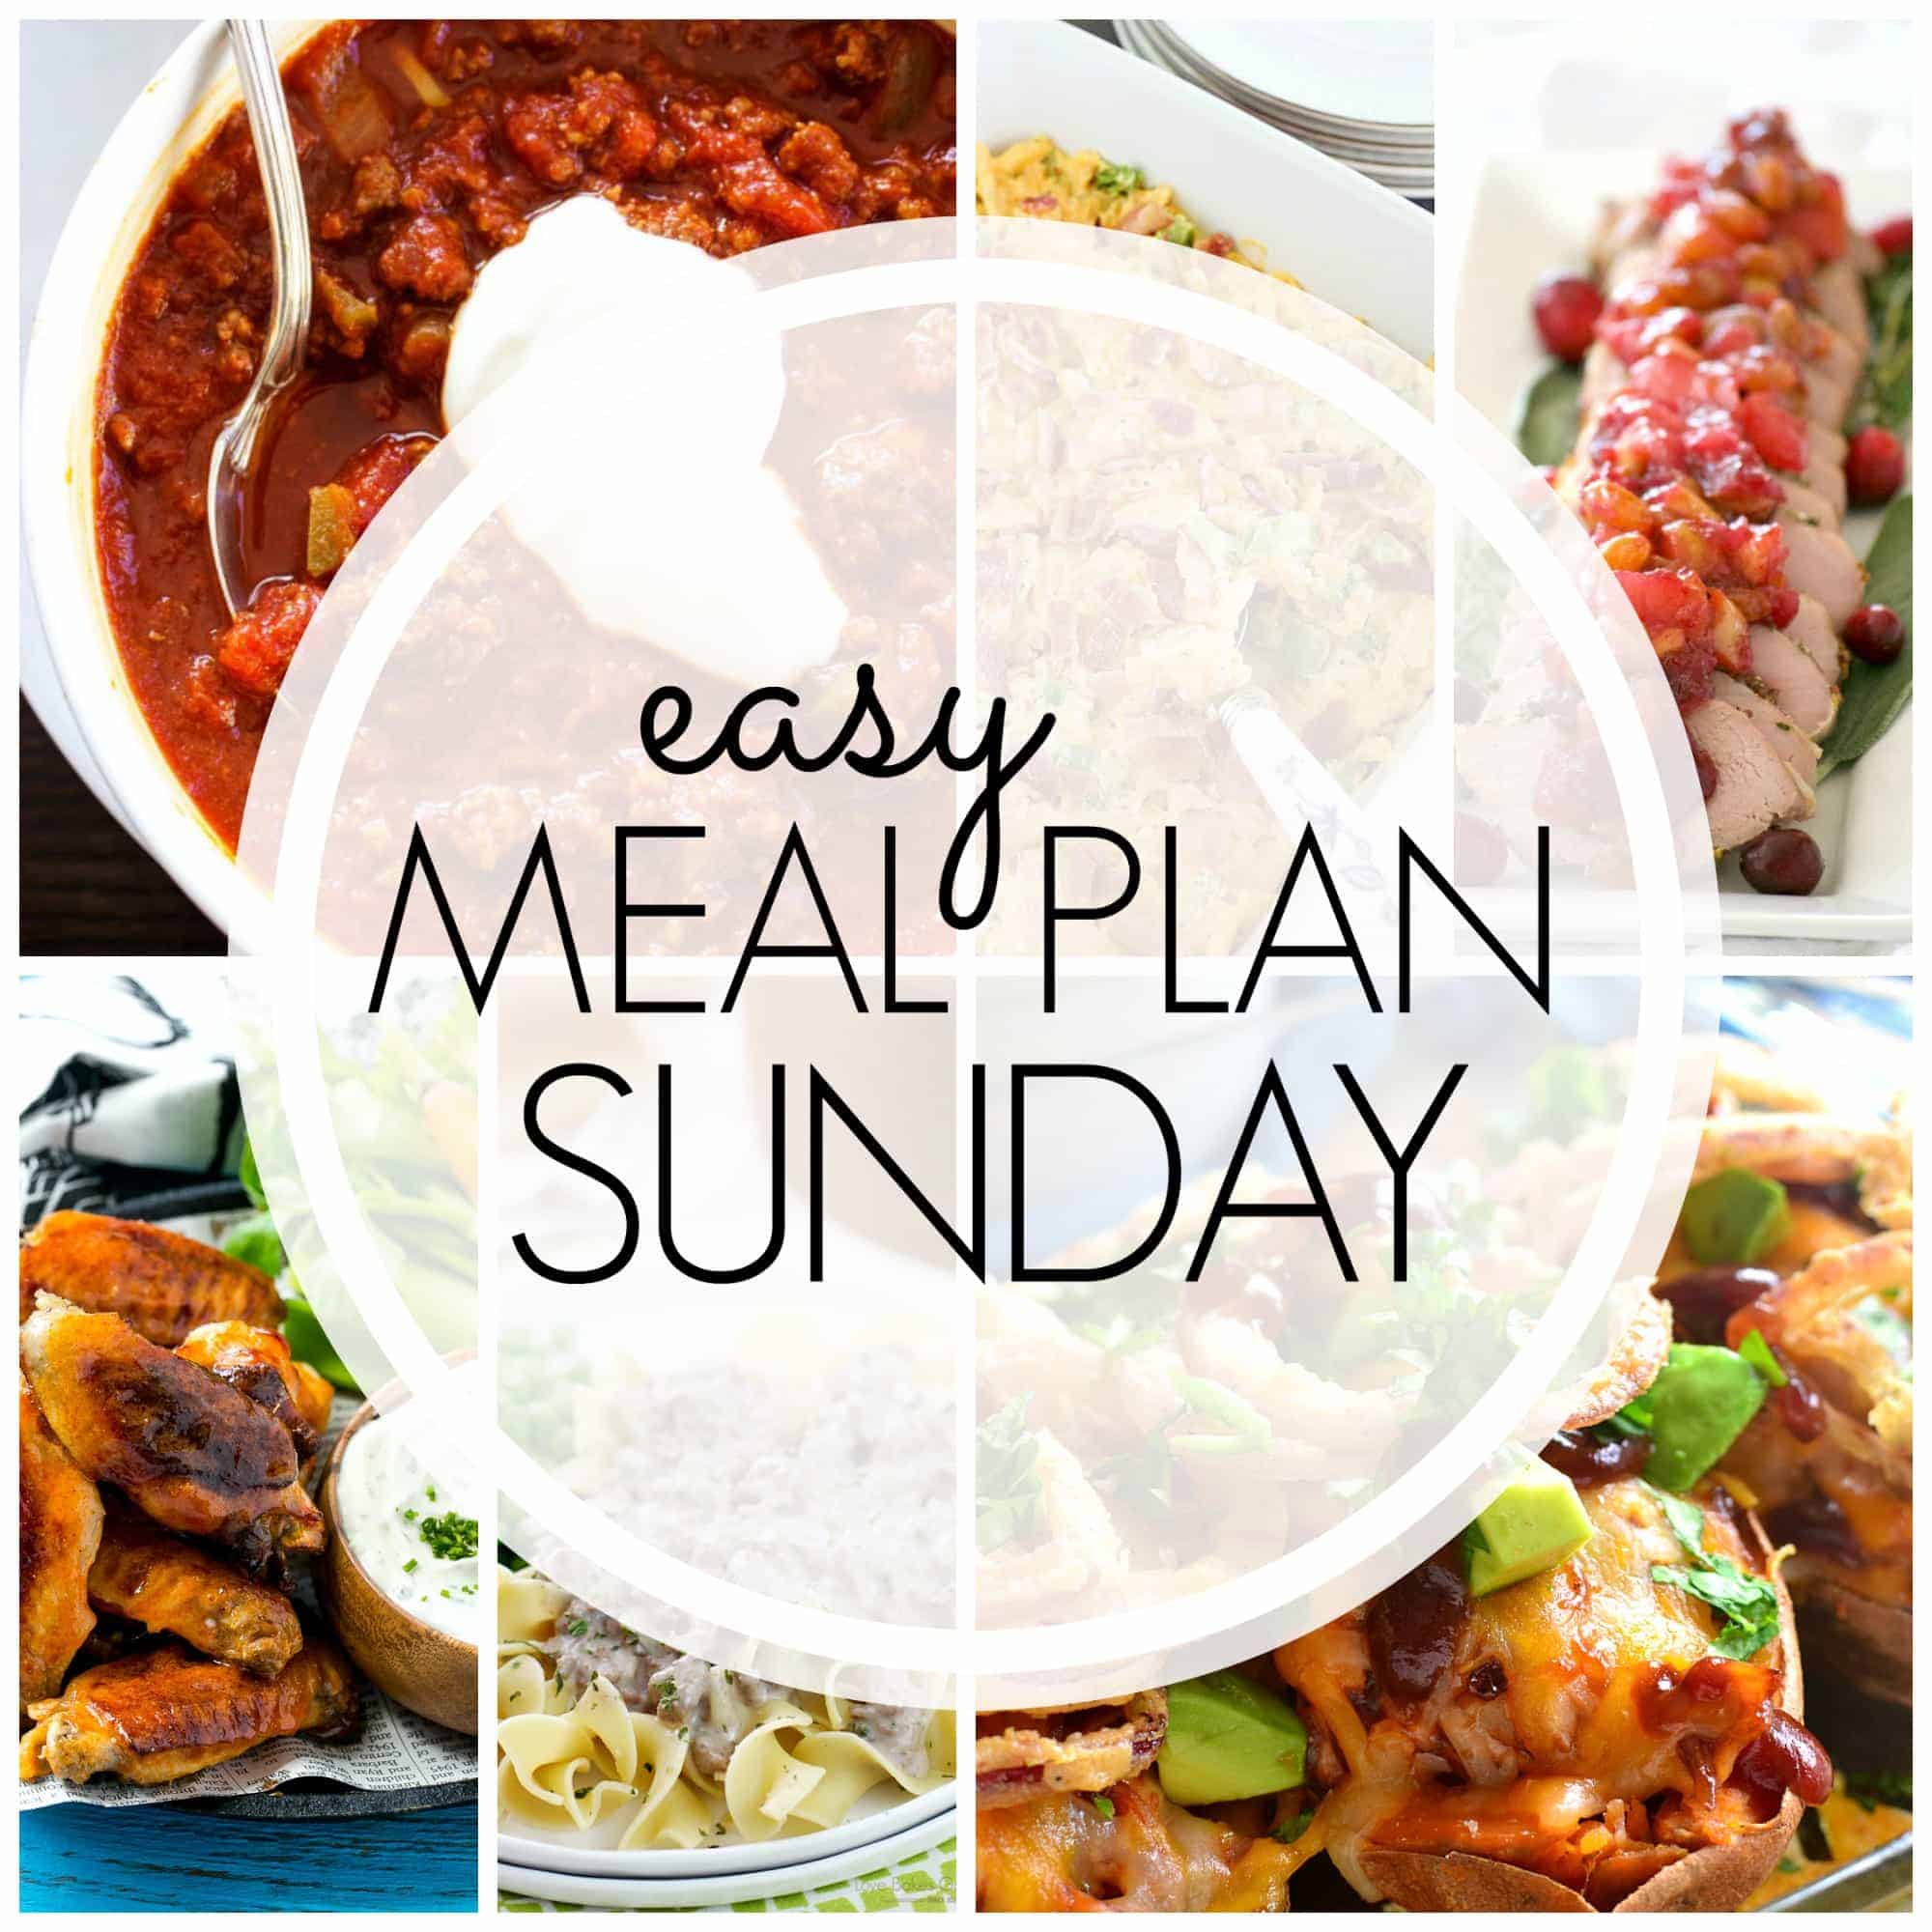 With Easy Meal Plan Sunday Week 78 - six dinners, two desserts and a breakfast recipe will help you remove the guesswork from this week's meal planning.